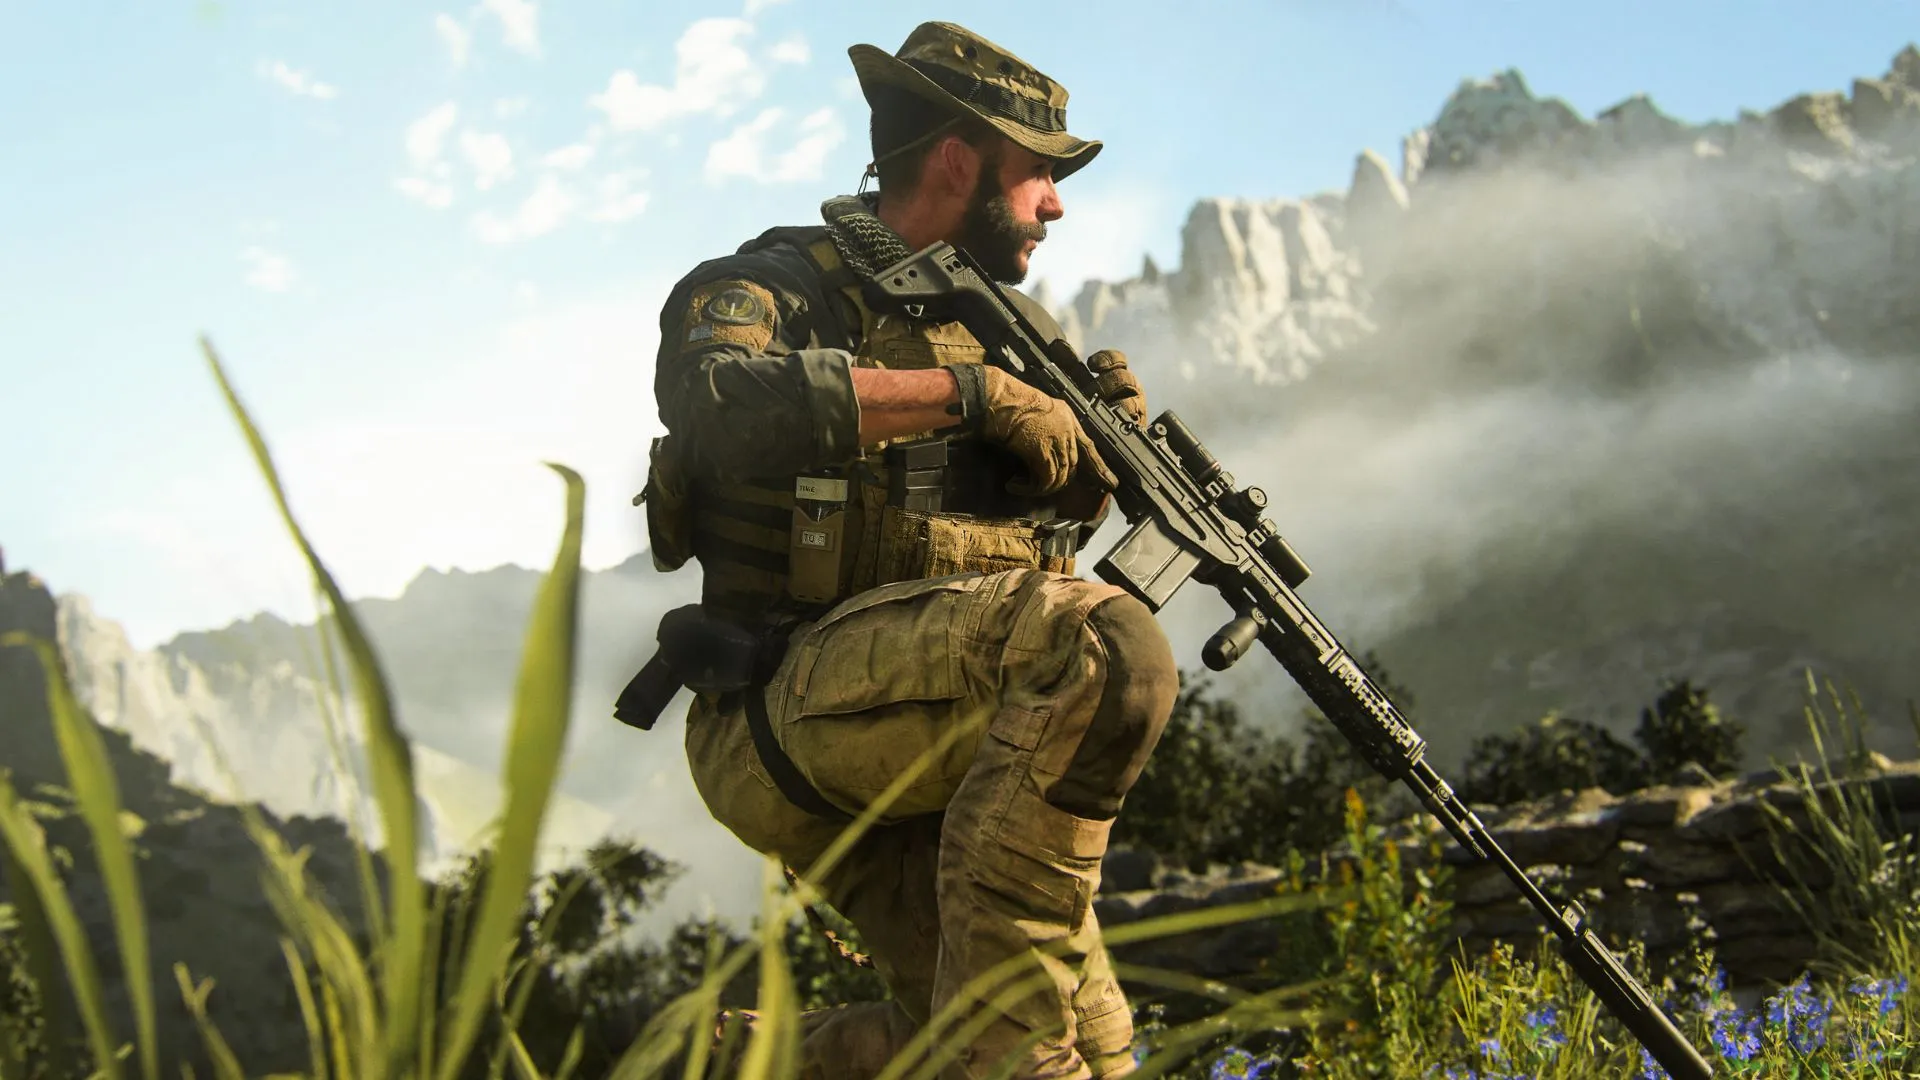 Modern Warfare 2 Campaign Remastered Officially Released, First on PS4 -  MP1st